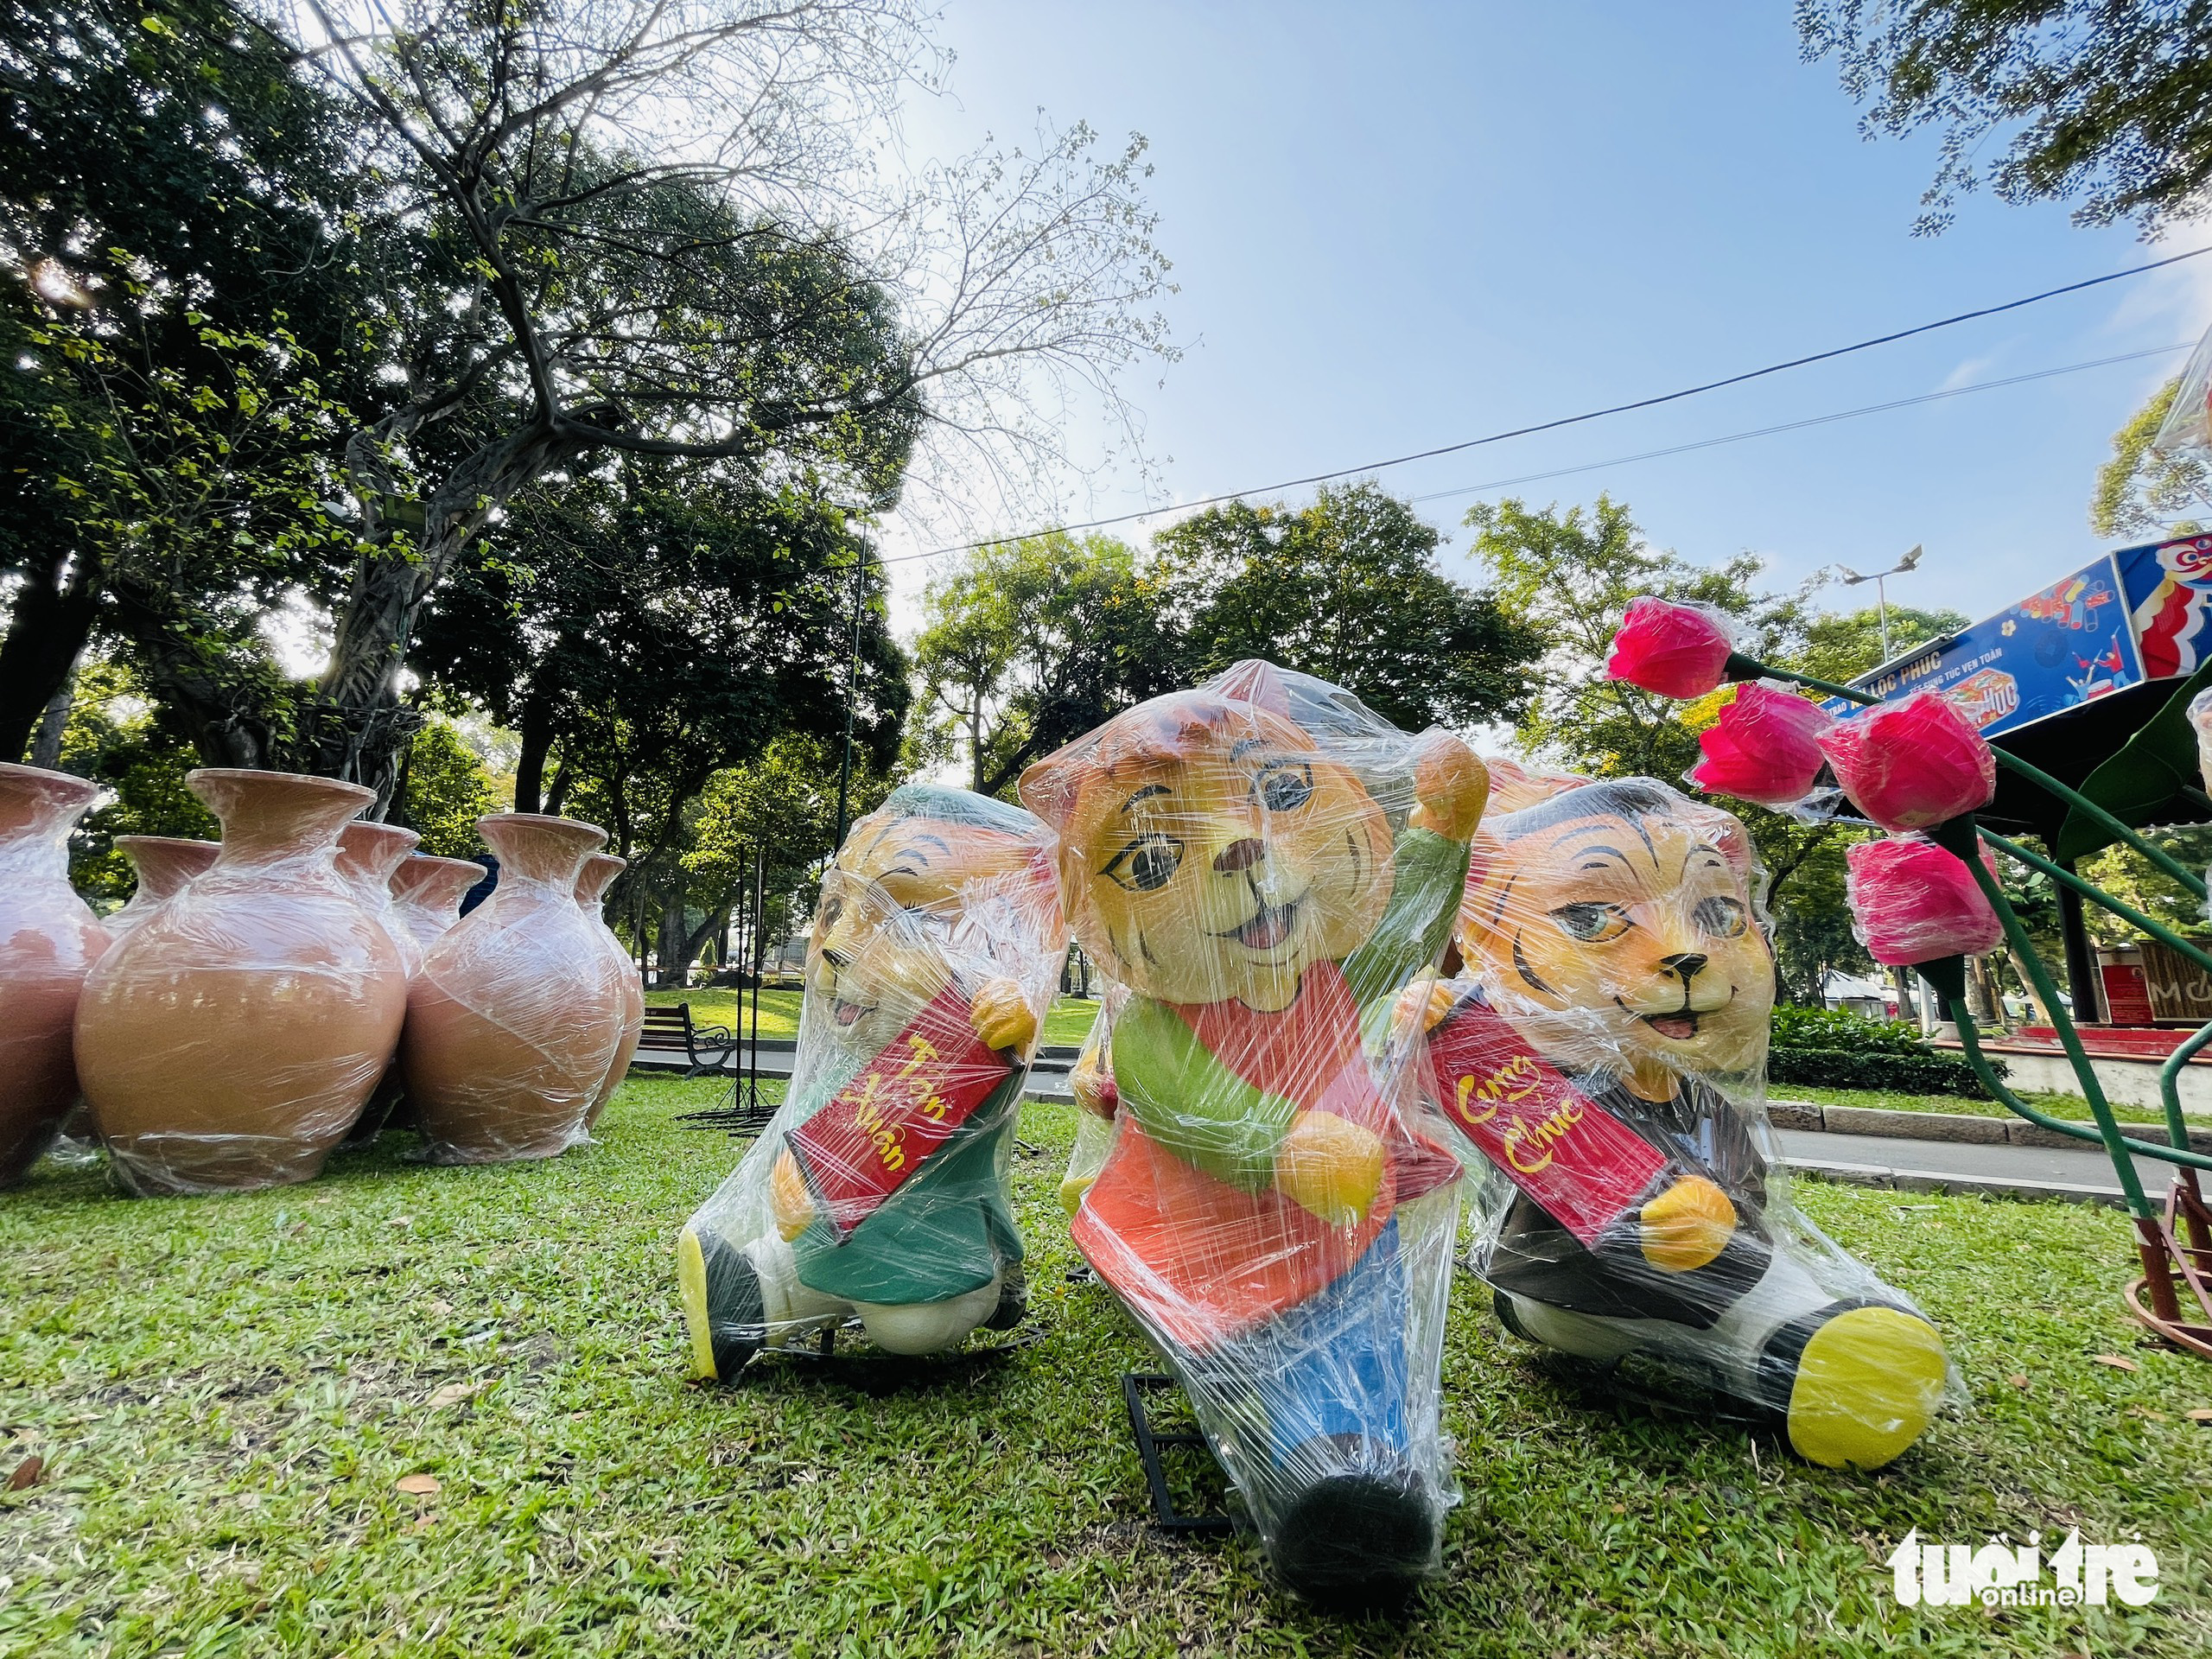 Tiger statues as part of the decorations at the 2022 Tet Flower Festival at Tao Dan Park in Ho Chi Minh City, January 23, 2022. Photo: Le Phan / Tuoi Tre